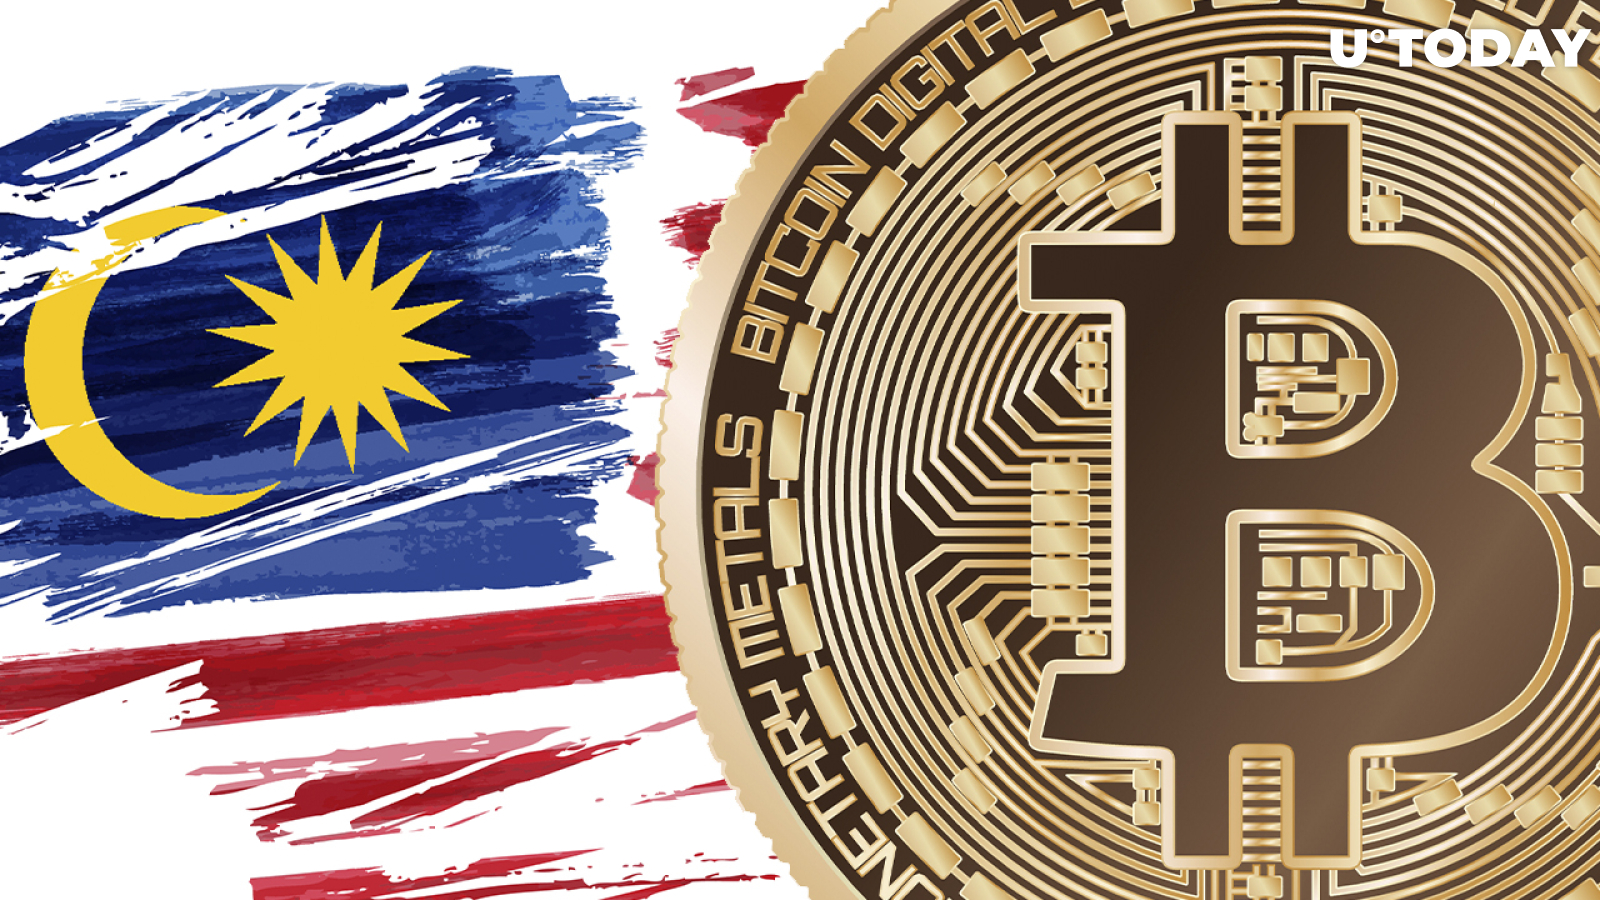 Malaysia Has No Plans to Recognize Bitcoin as Legal Currency